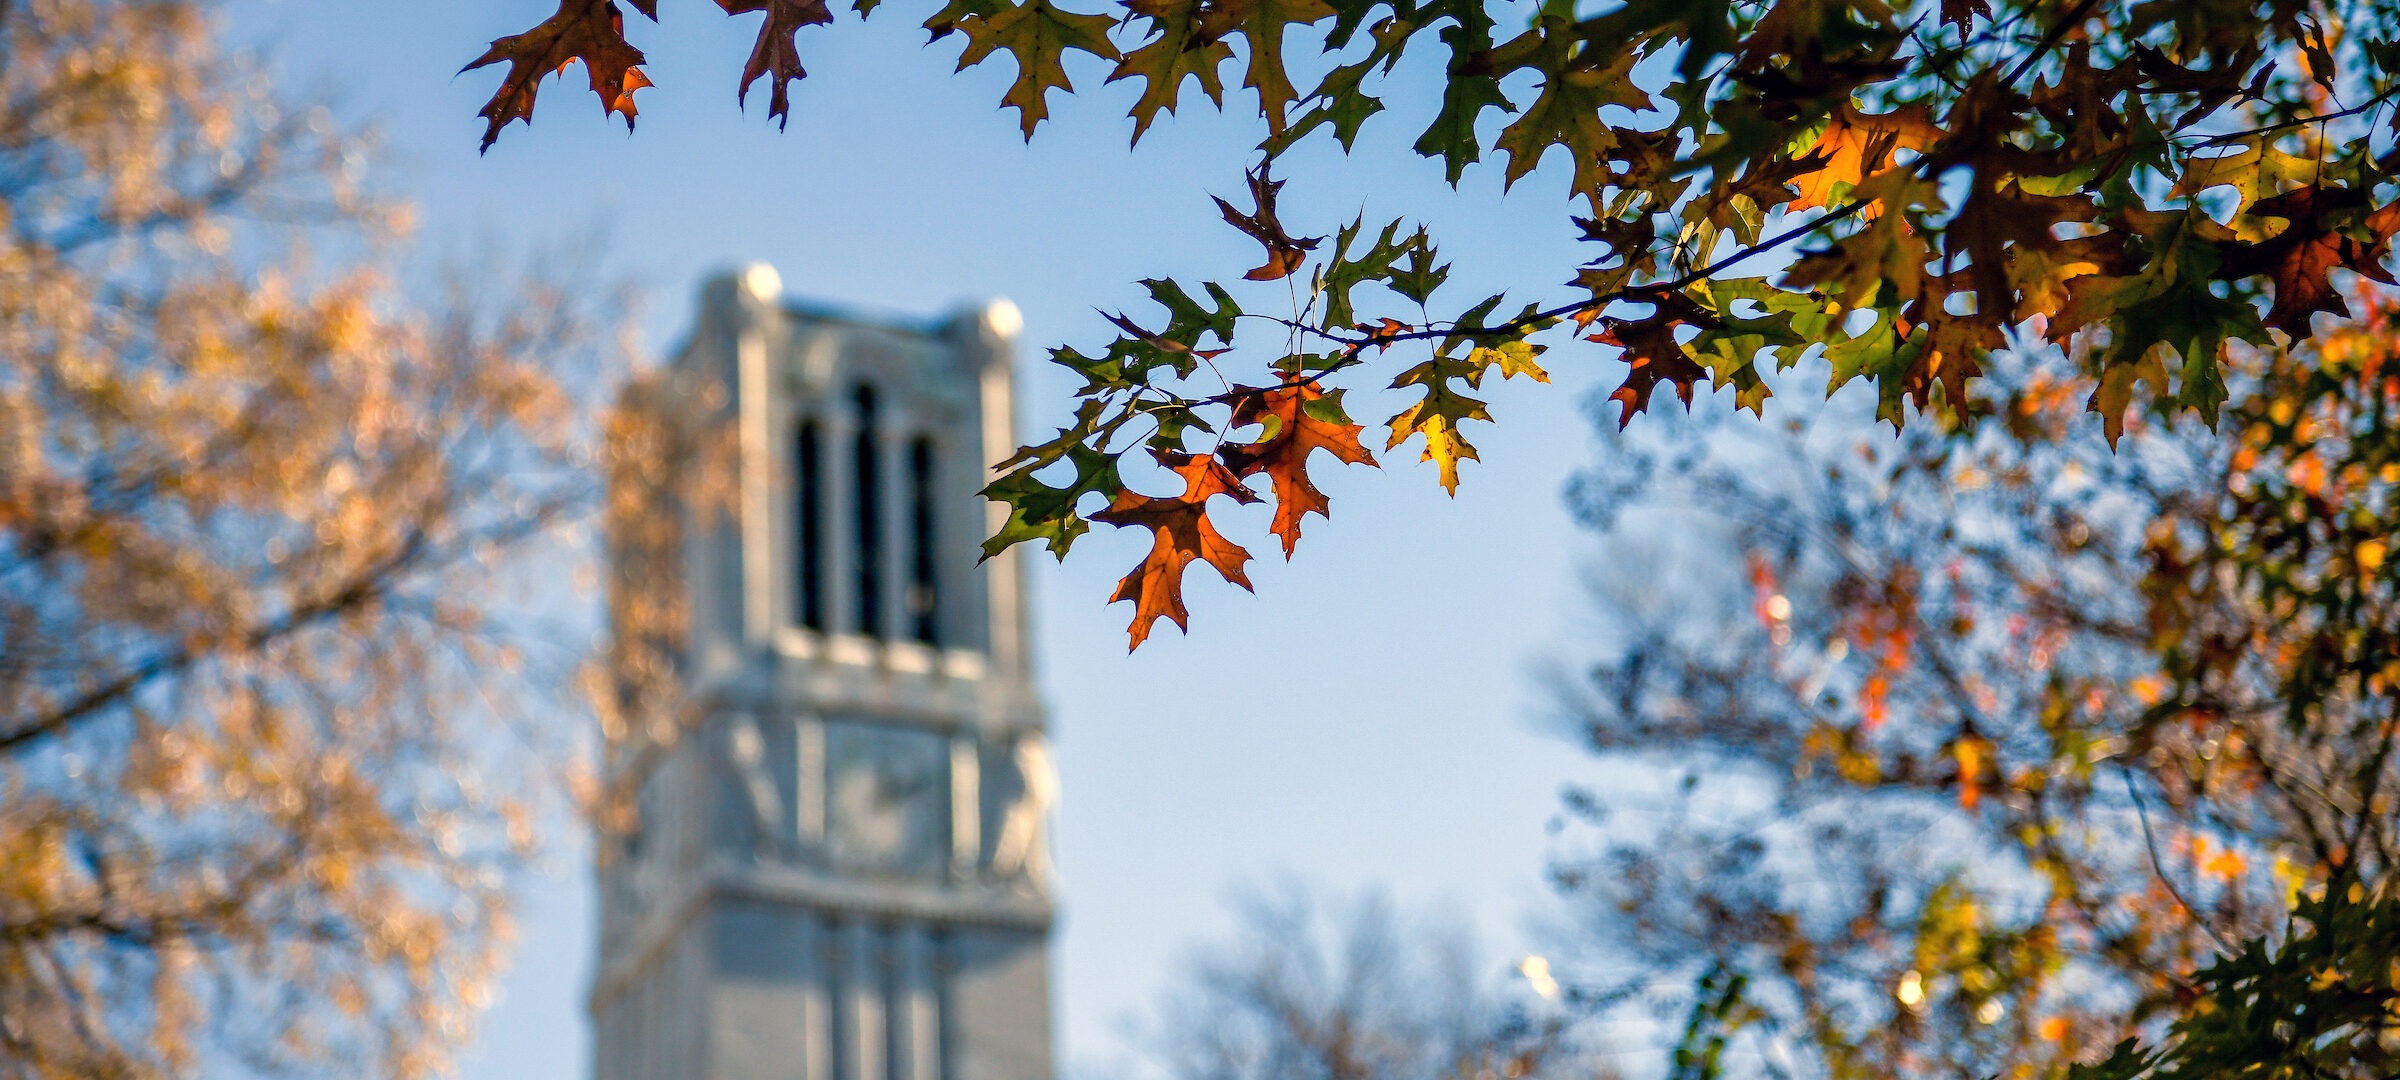 The Belltower provides a backdrop for colorful fall leaves.